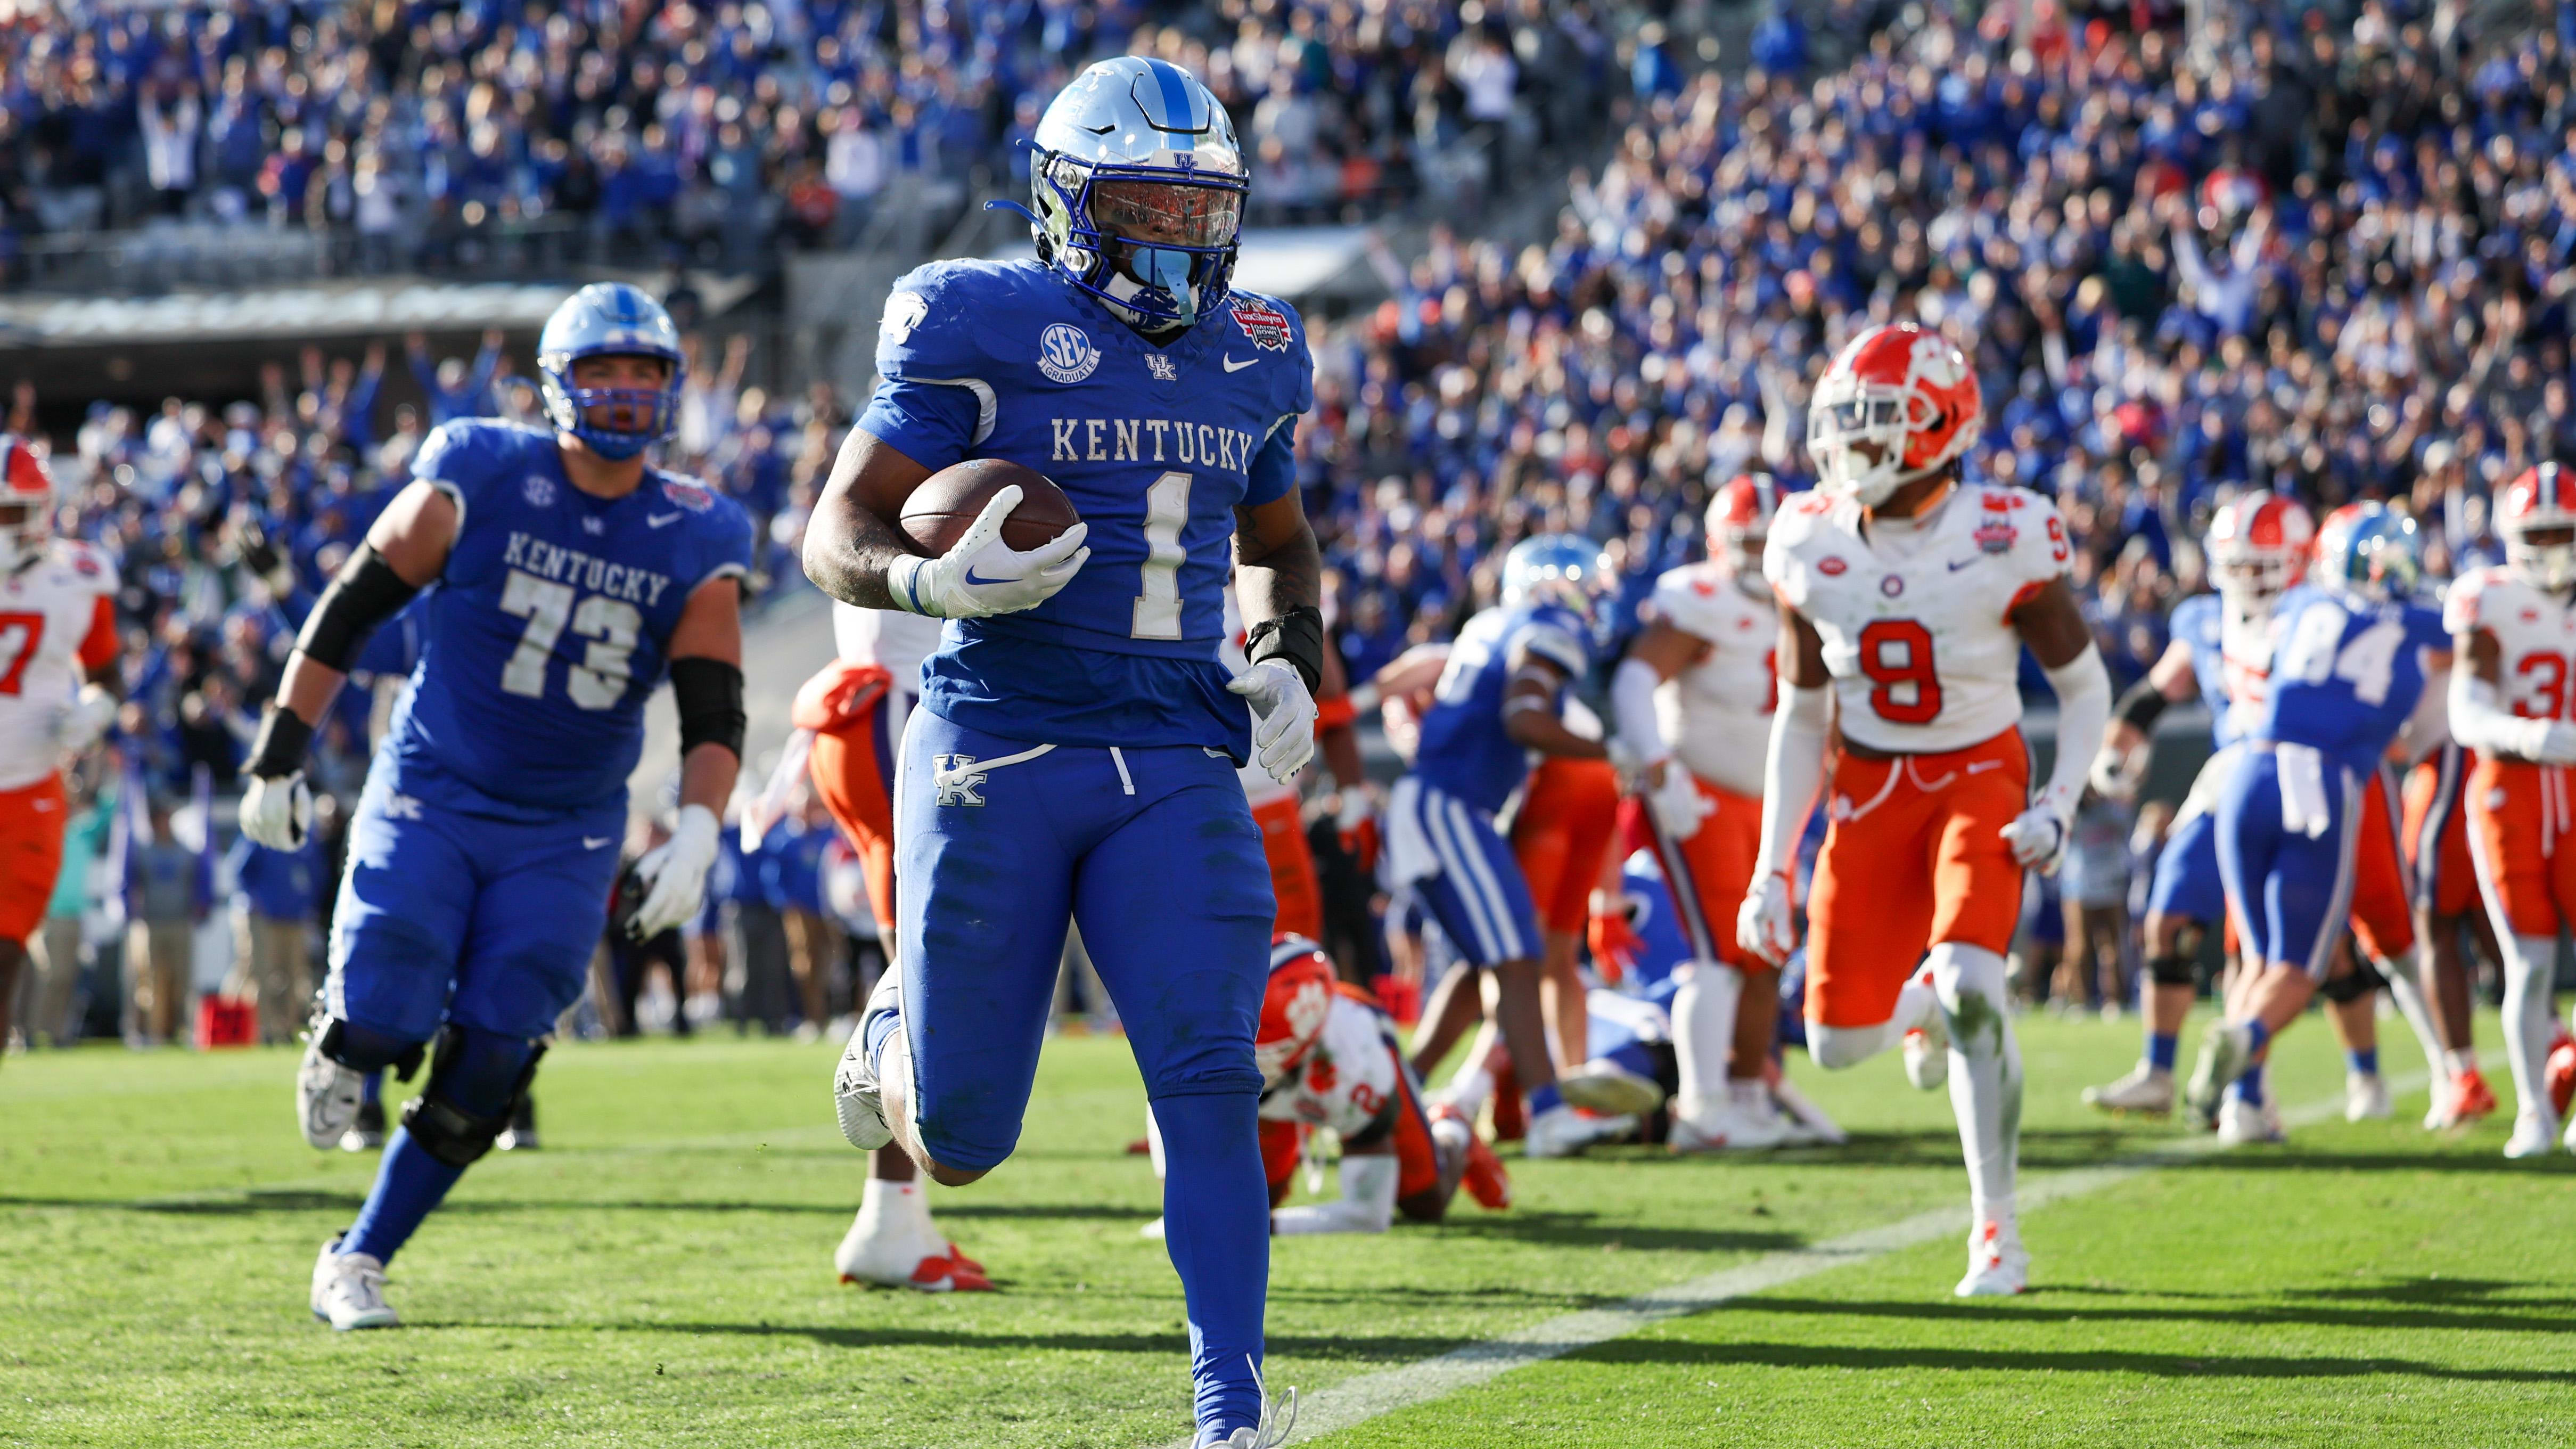 Kentucky's Ray Davis has power and speed but hasn't been overworked as a college ball carrier.